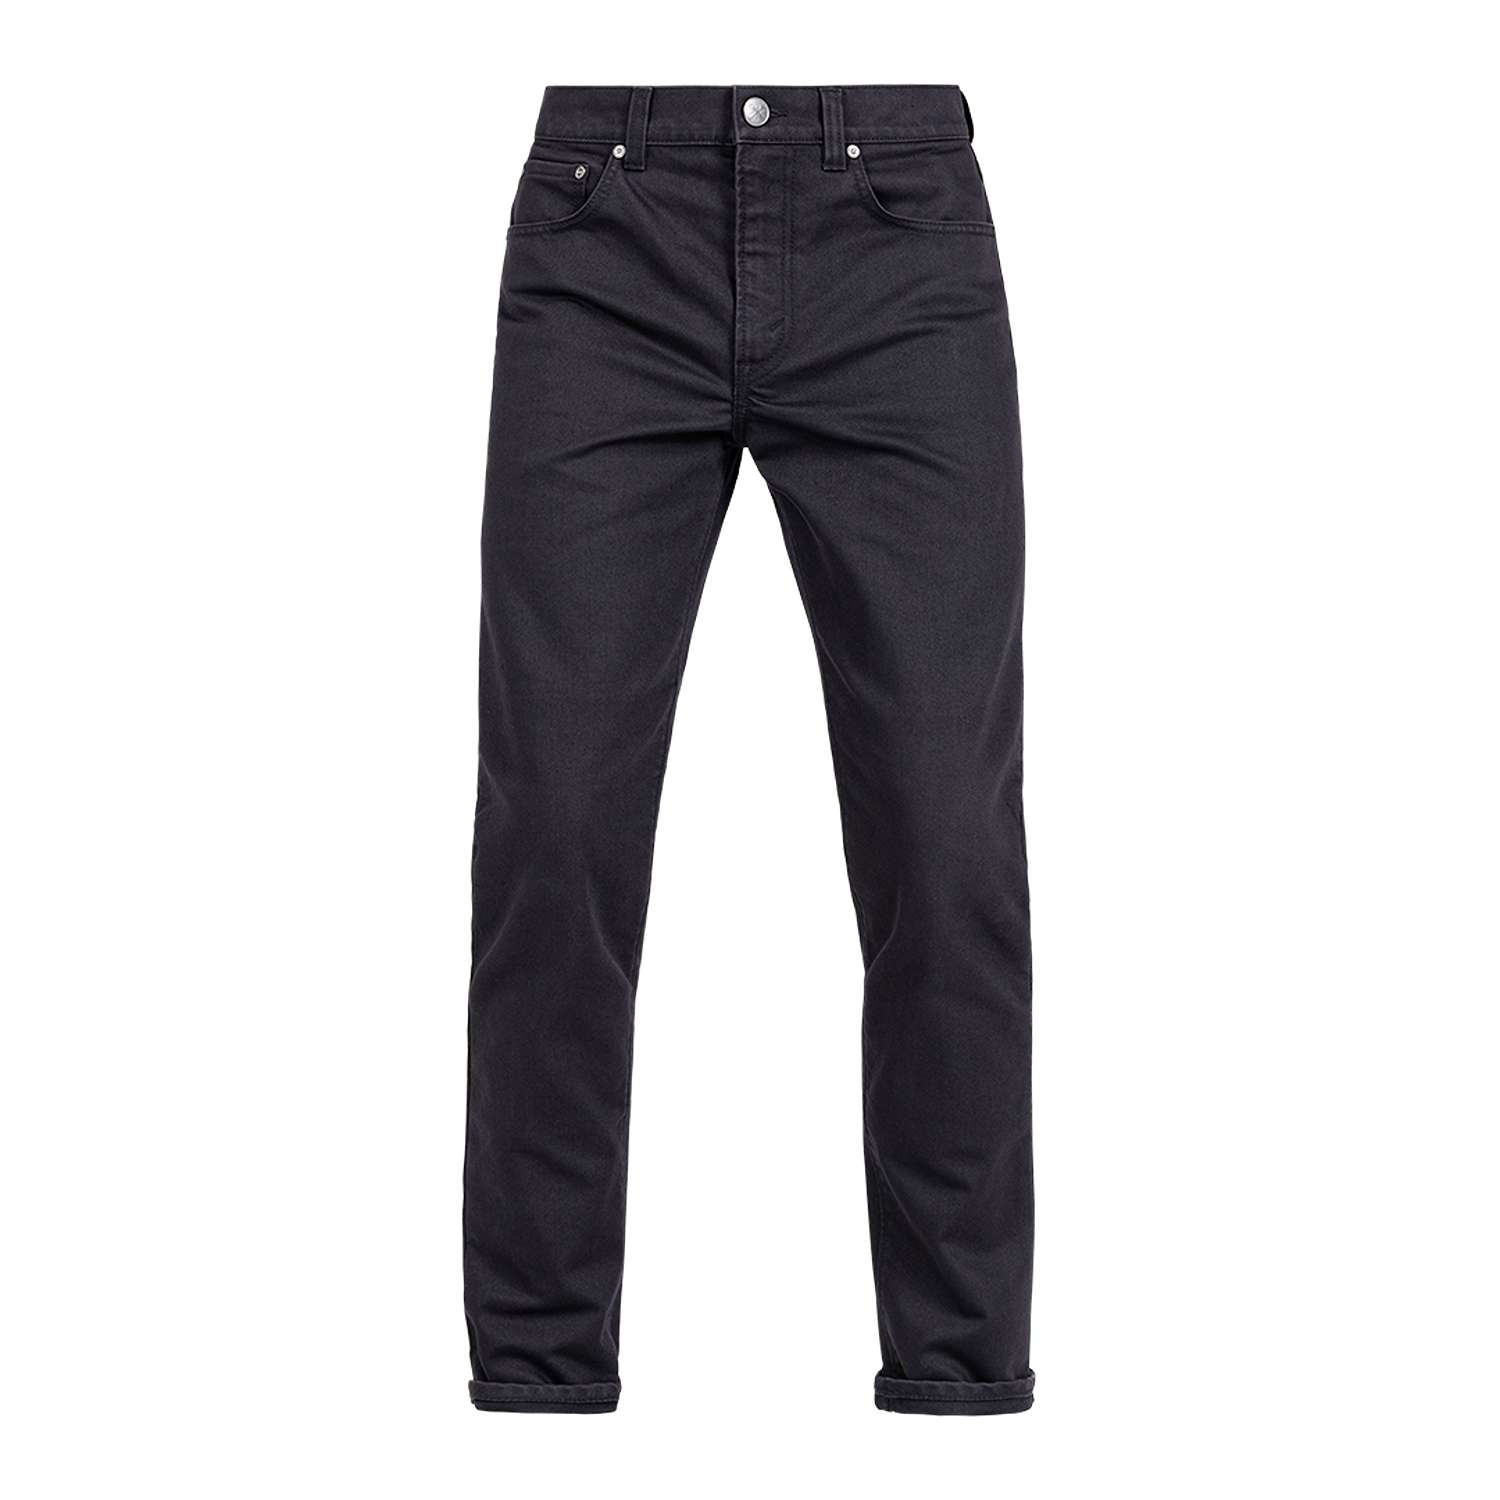 Image of John Doe Classic Tapered Jeans Black Black Taille W31/L32